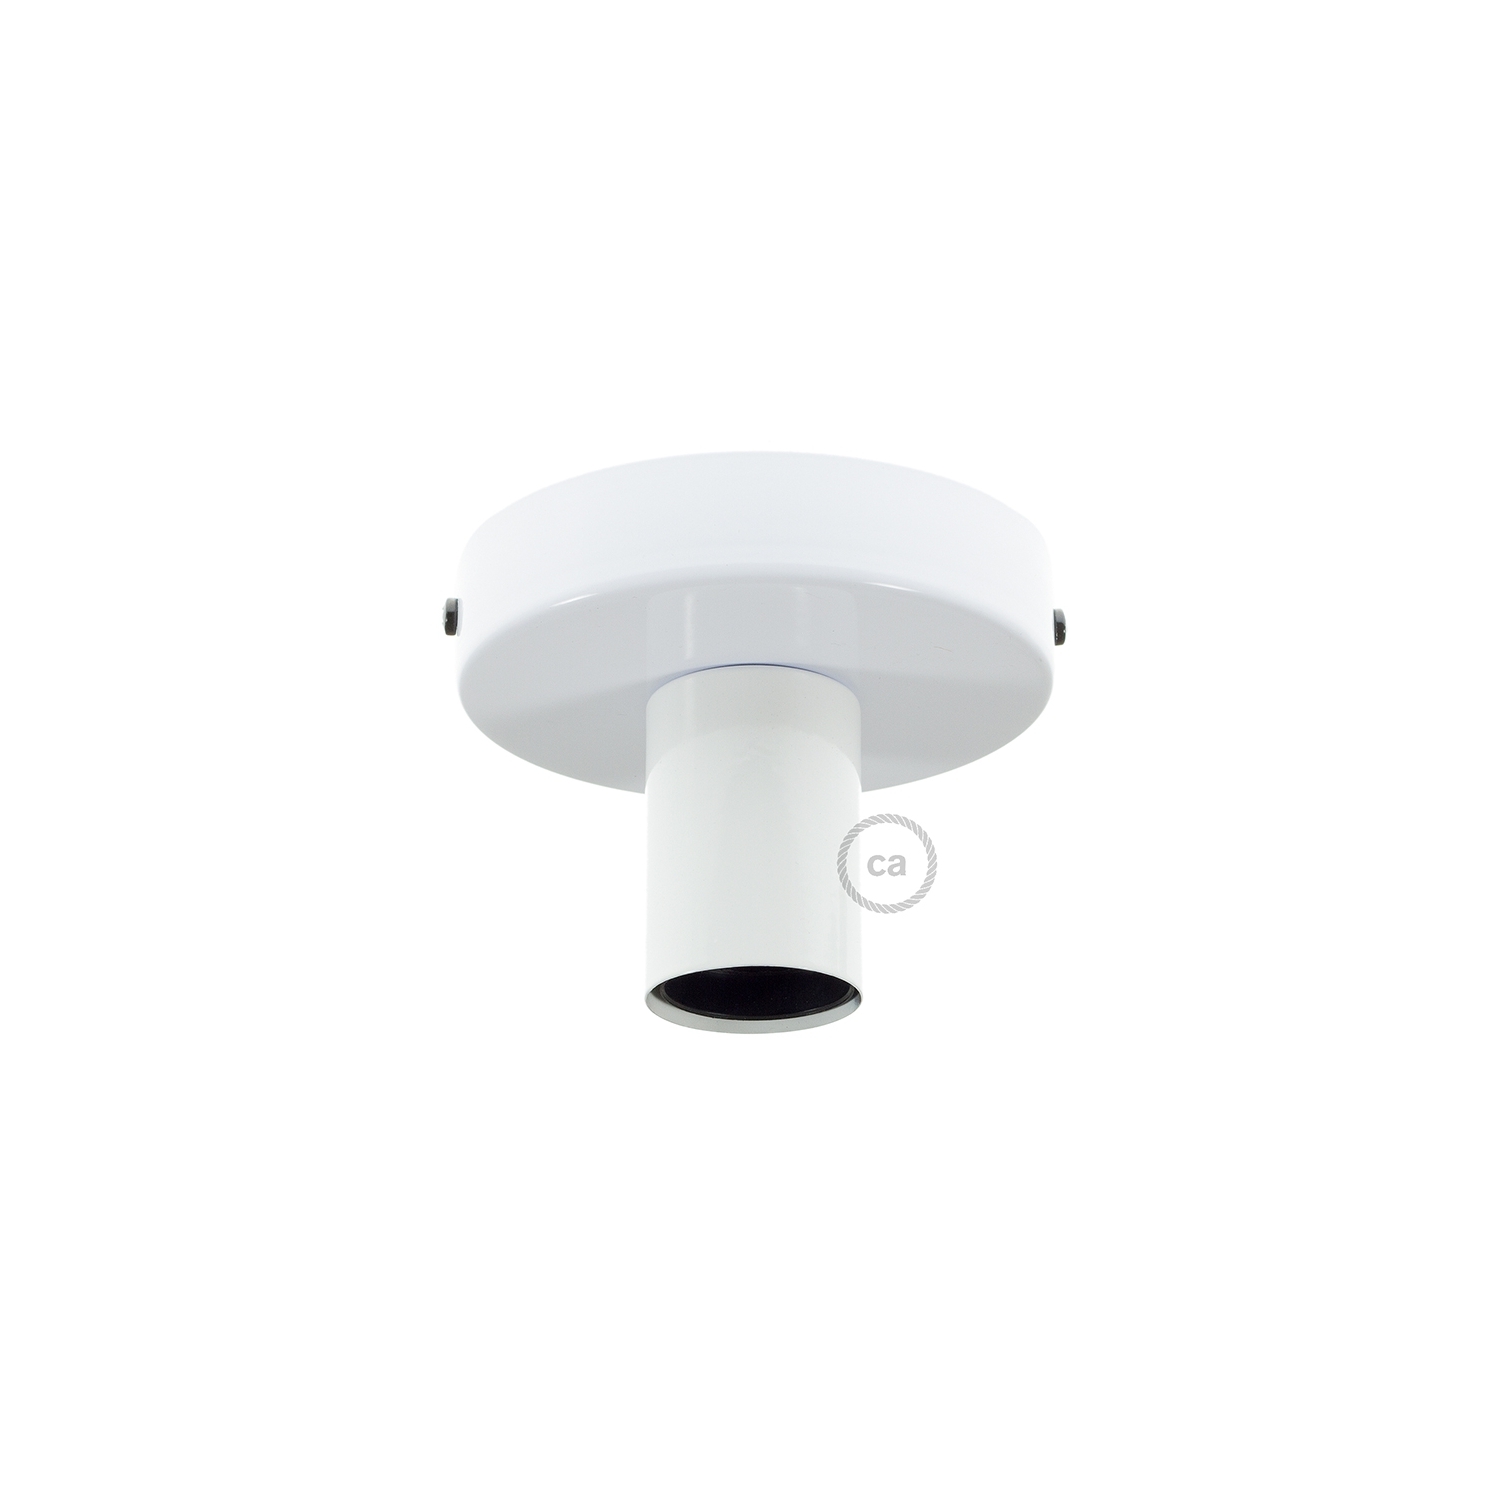 Fermaluce, the white metal wall or ceiling light source.